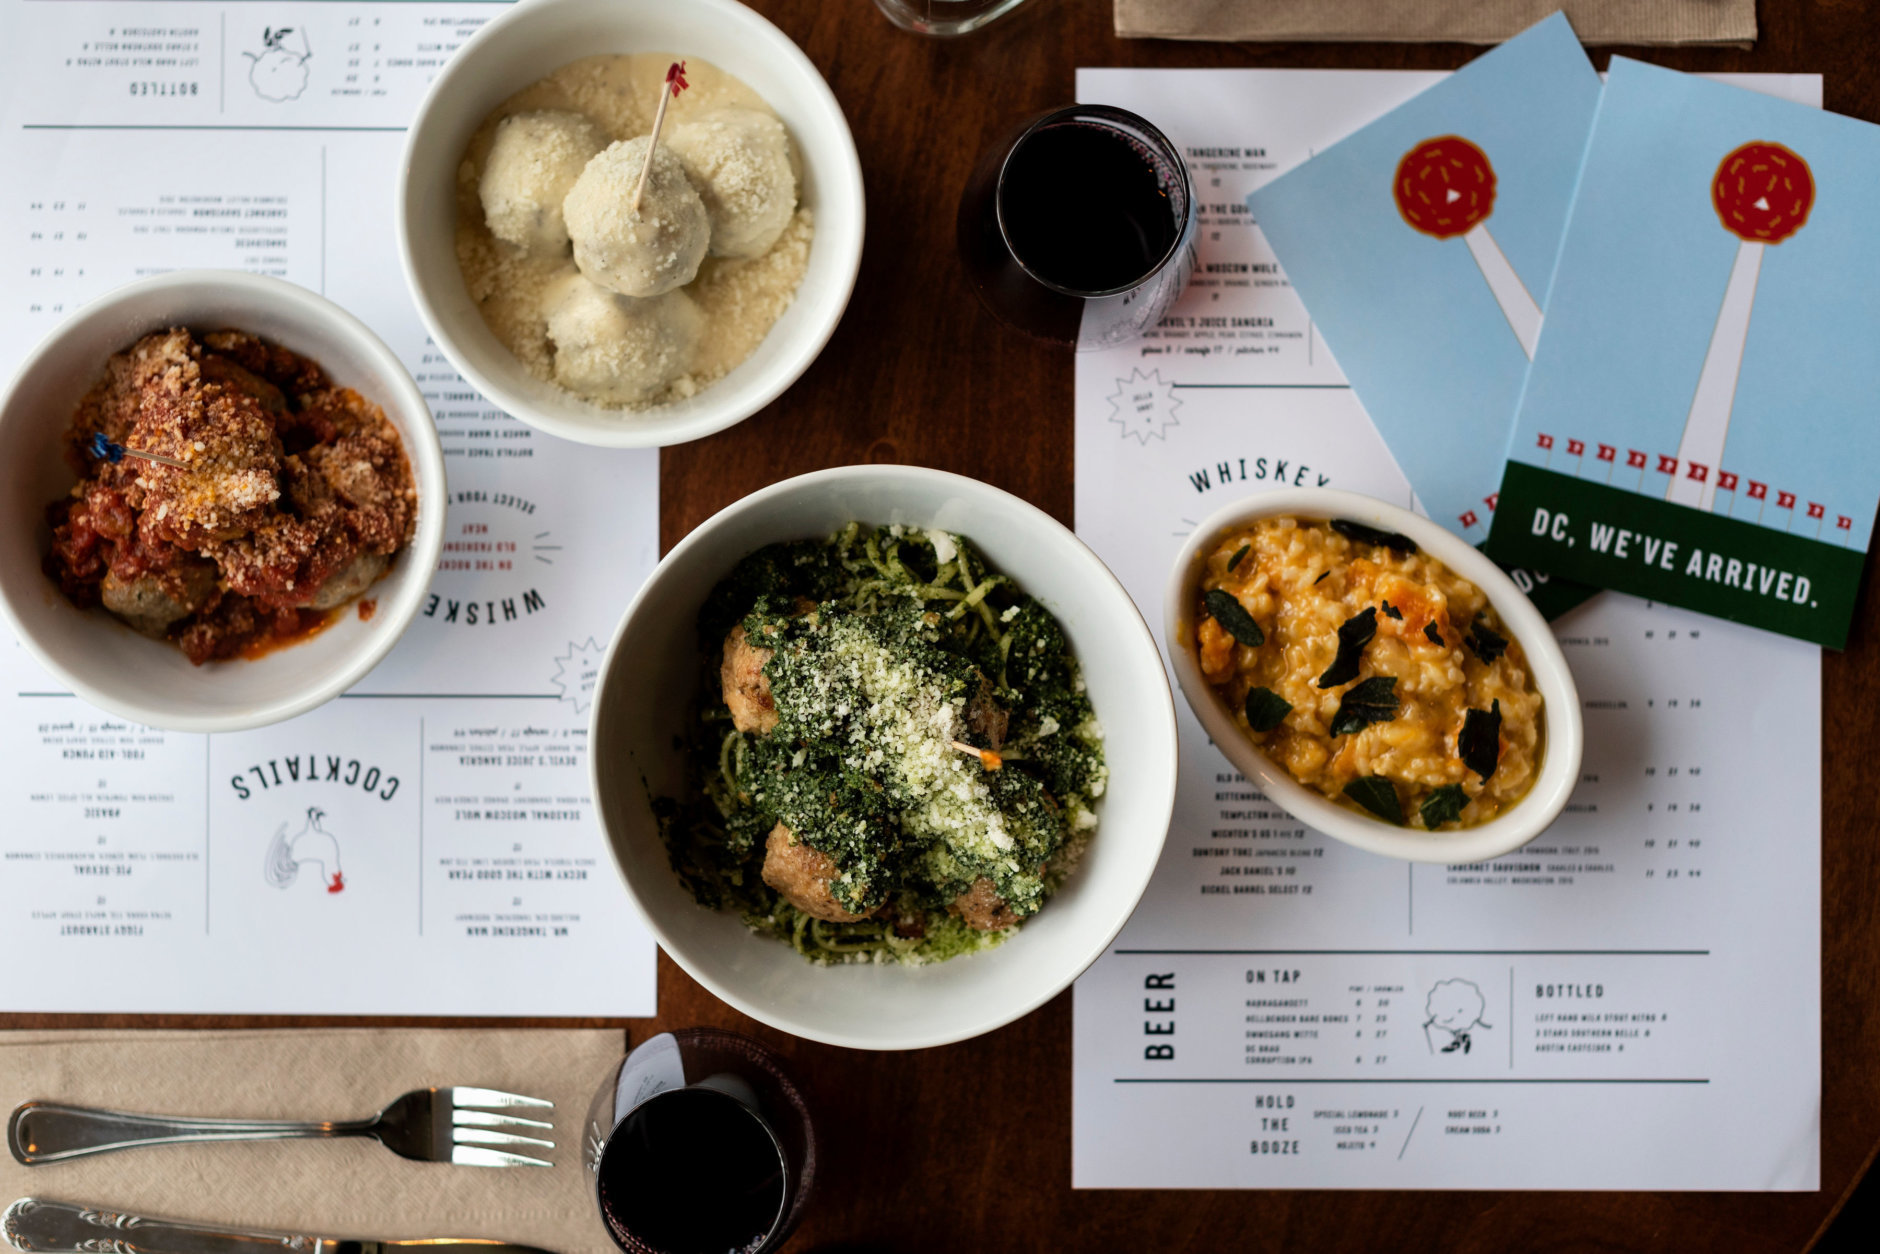 The menu at The Meatball Shop also includes mozzarella balls, risotto balls, buffalo balls and crab cake balls, as well as salads and sides. (Courtesy Liz Clayman)